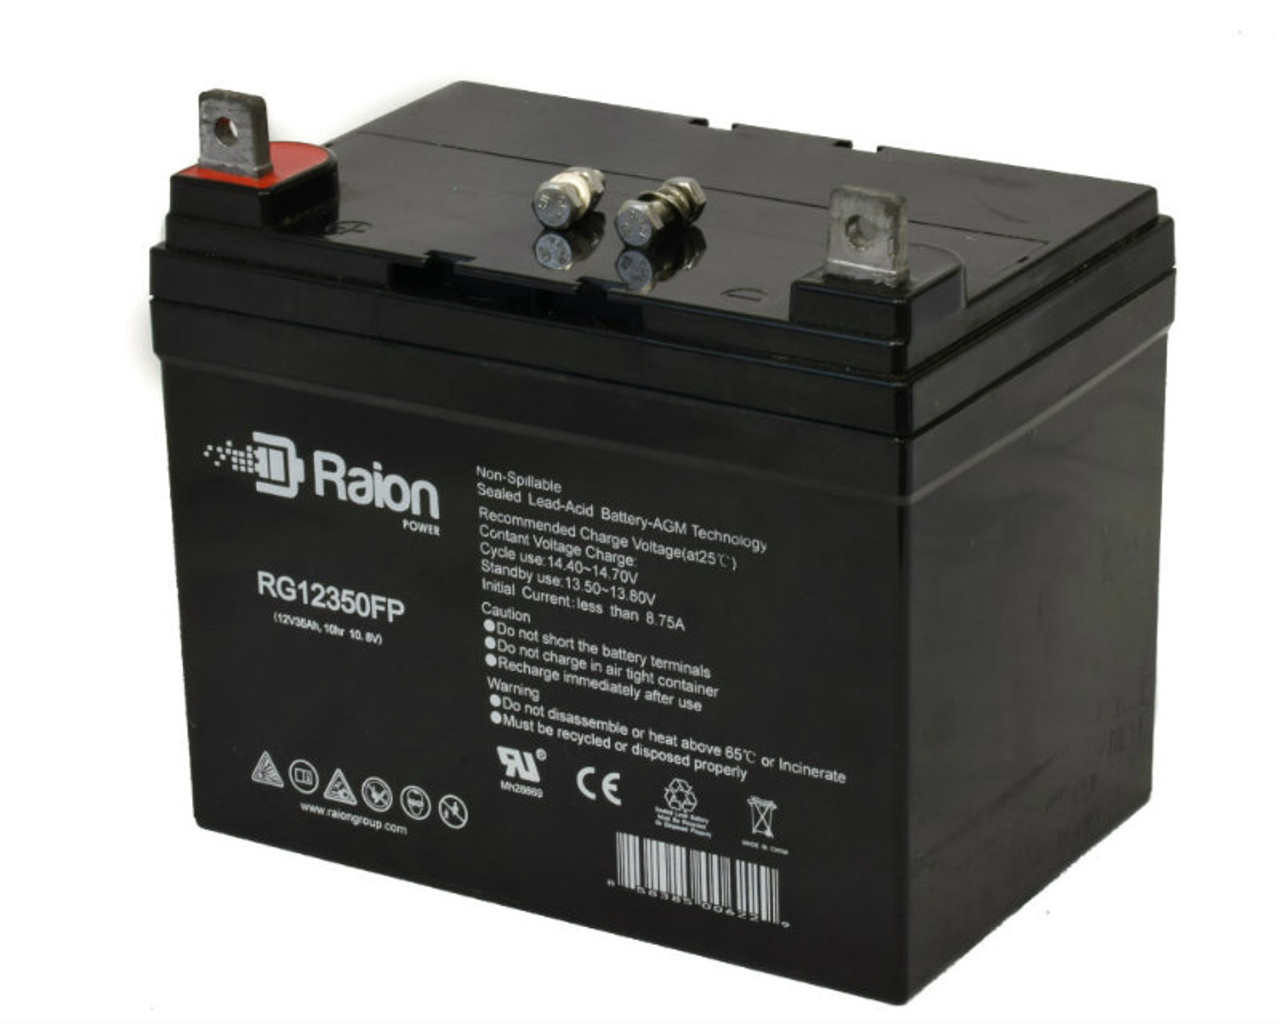 Raion Power Replacement 12V 35Ah RG12350FP Mobility Scooter Battery for Fortress Scientific 2001LX